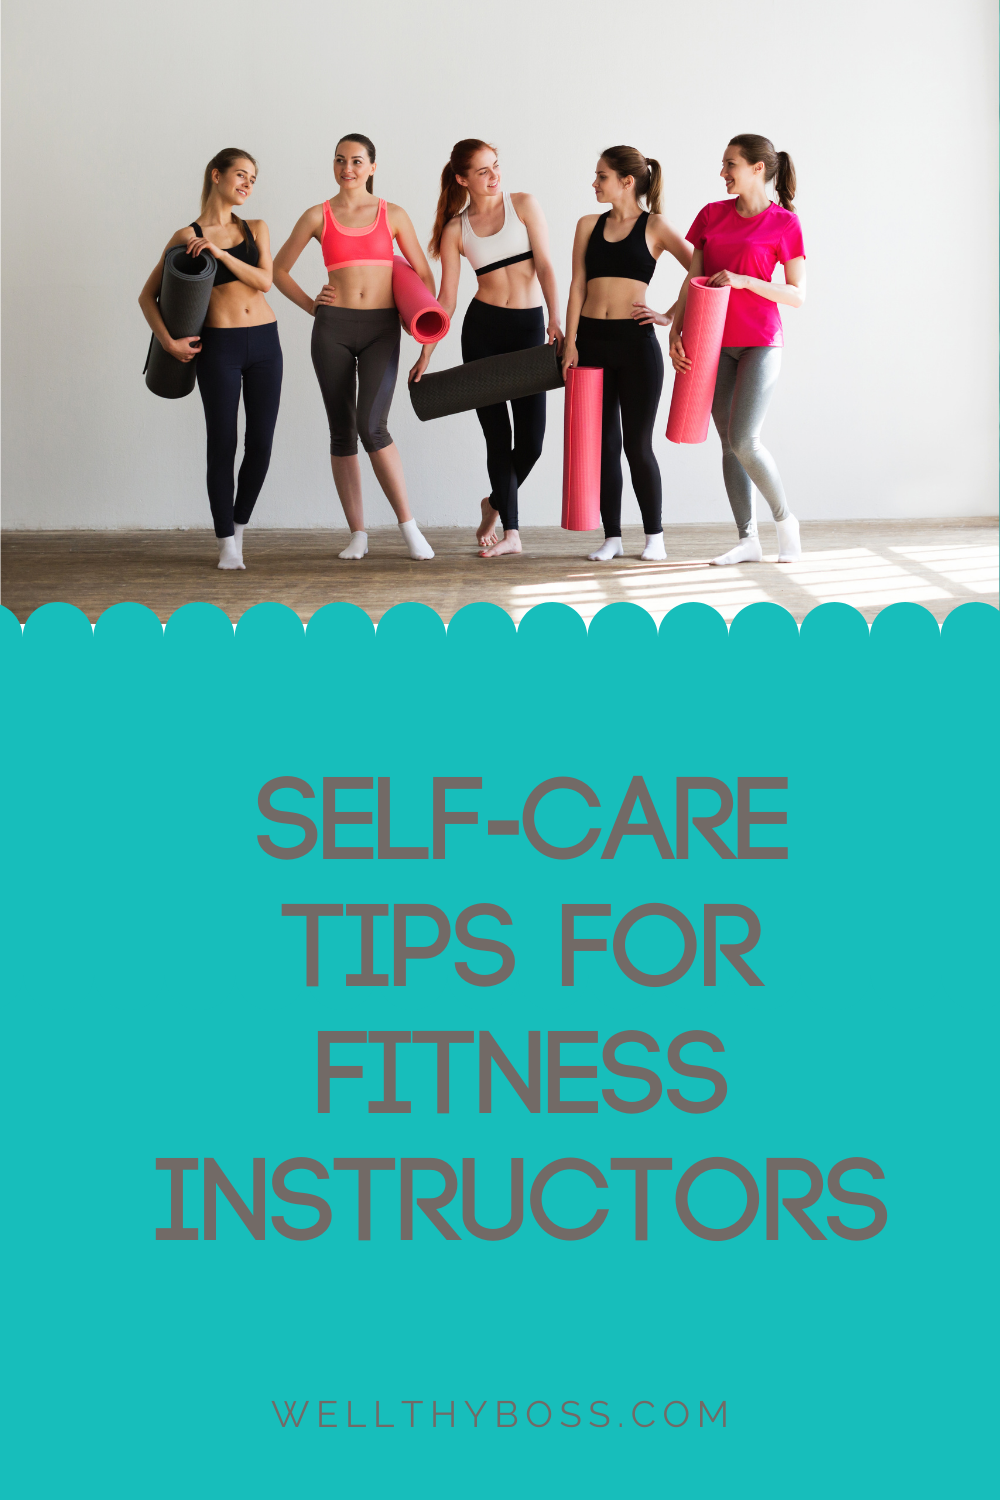 Self-care tips for fitness instructors